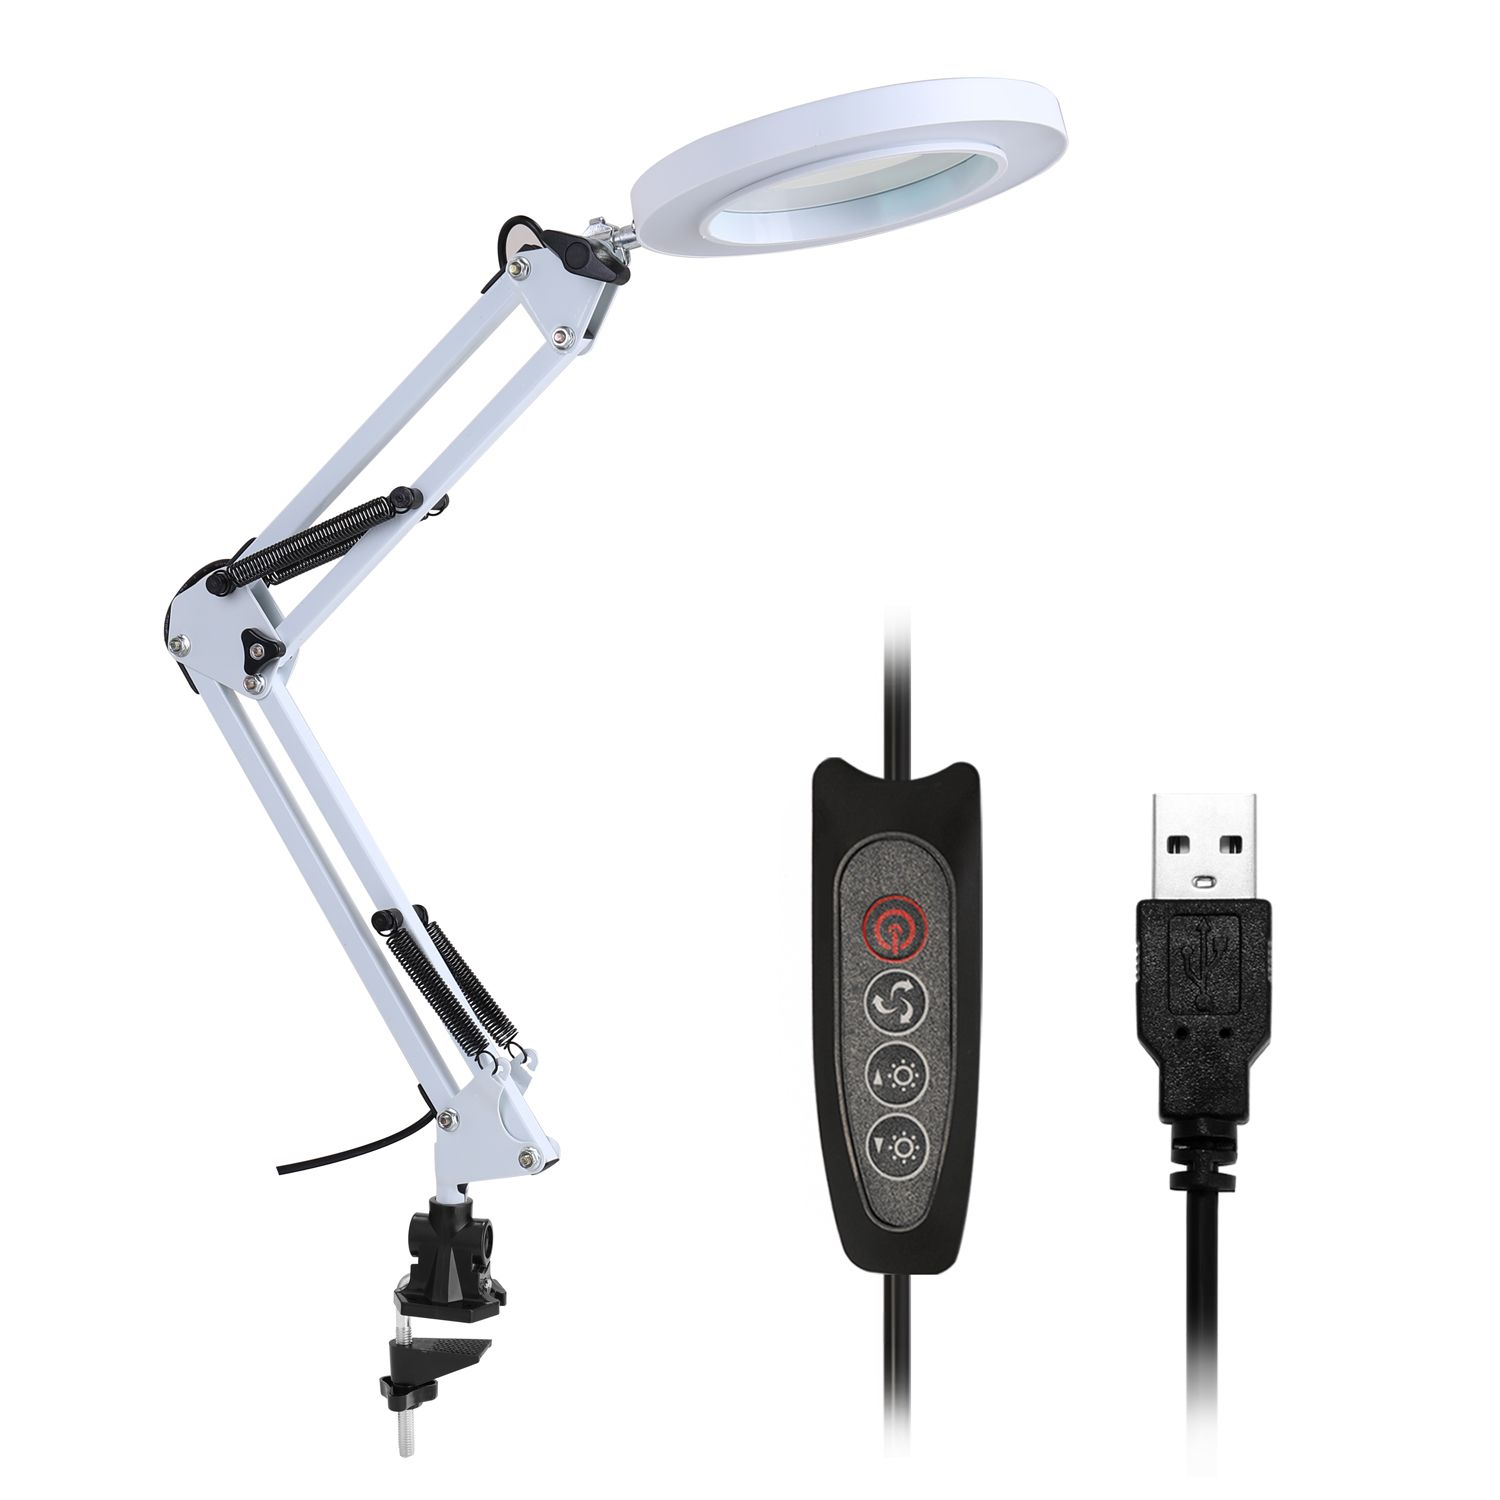 NEWACALOX-Professional-5X-Magnifying-Glass-Desk-Lamp-Magnifier-LED-Light-Foldable-Reading-Lamp-Magni-1652852